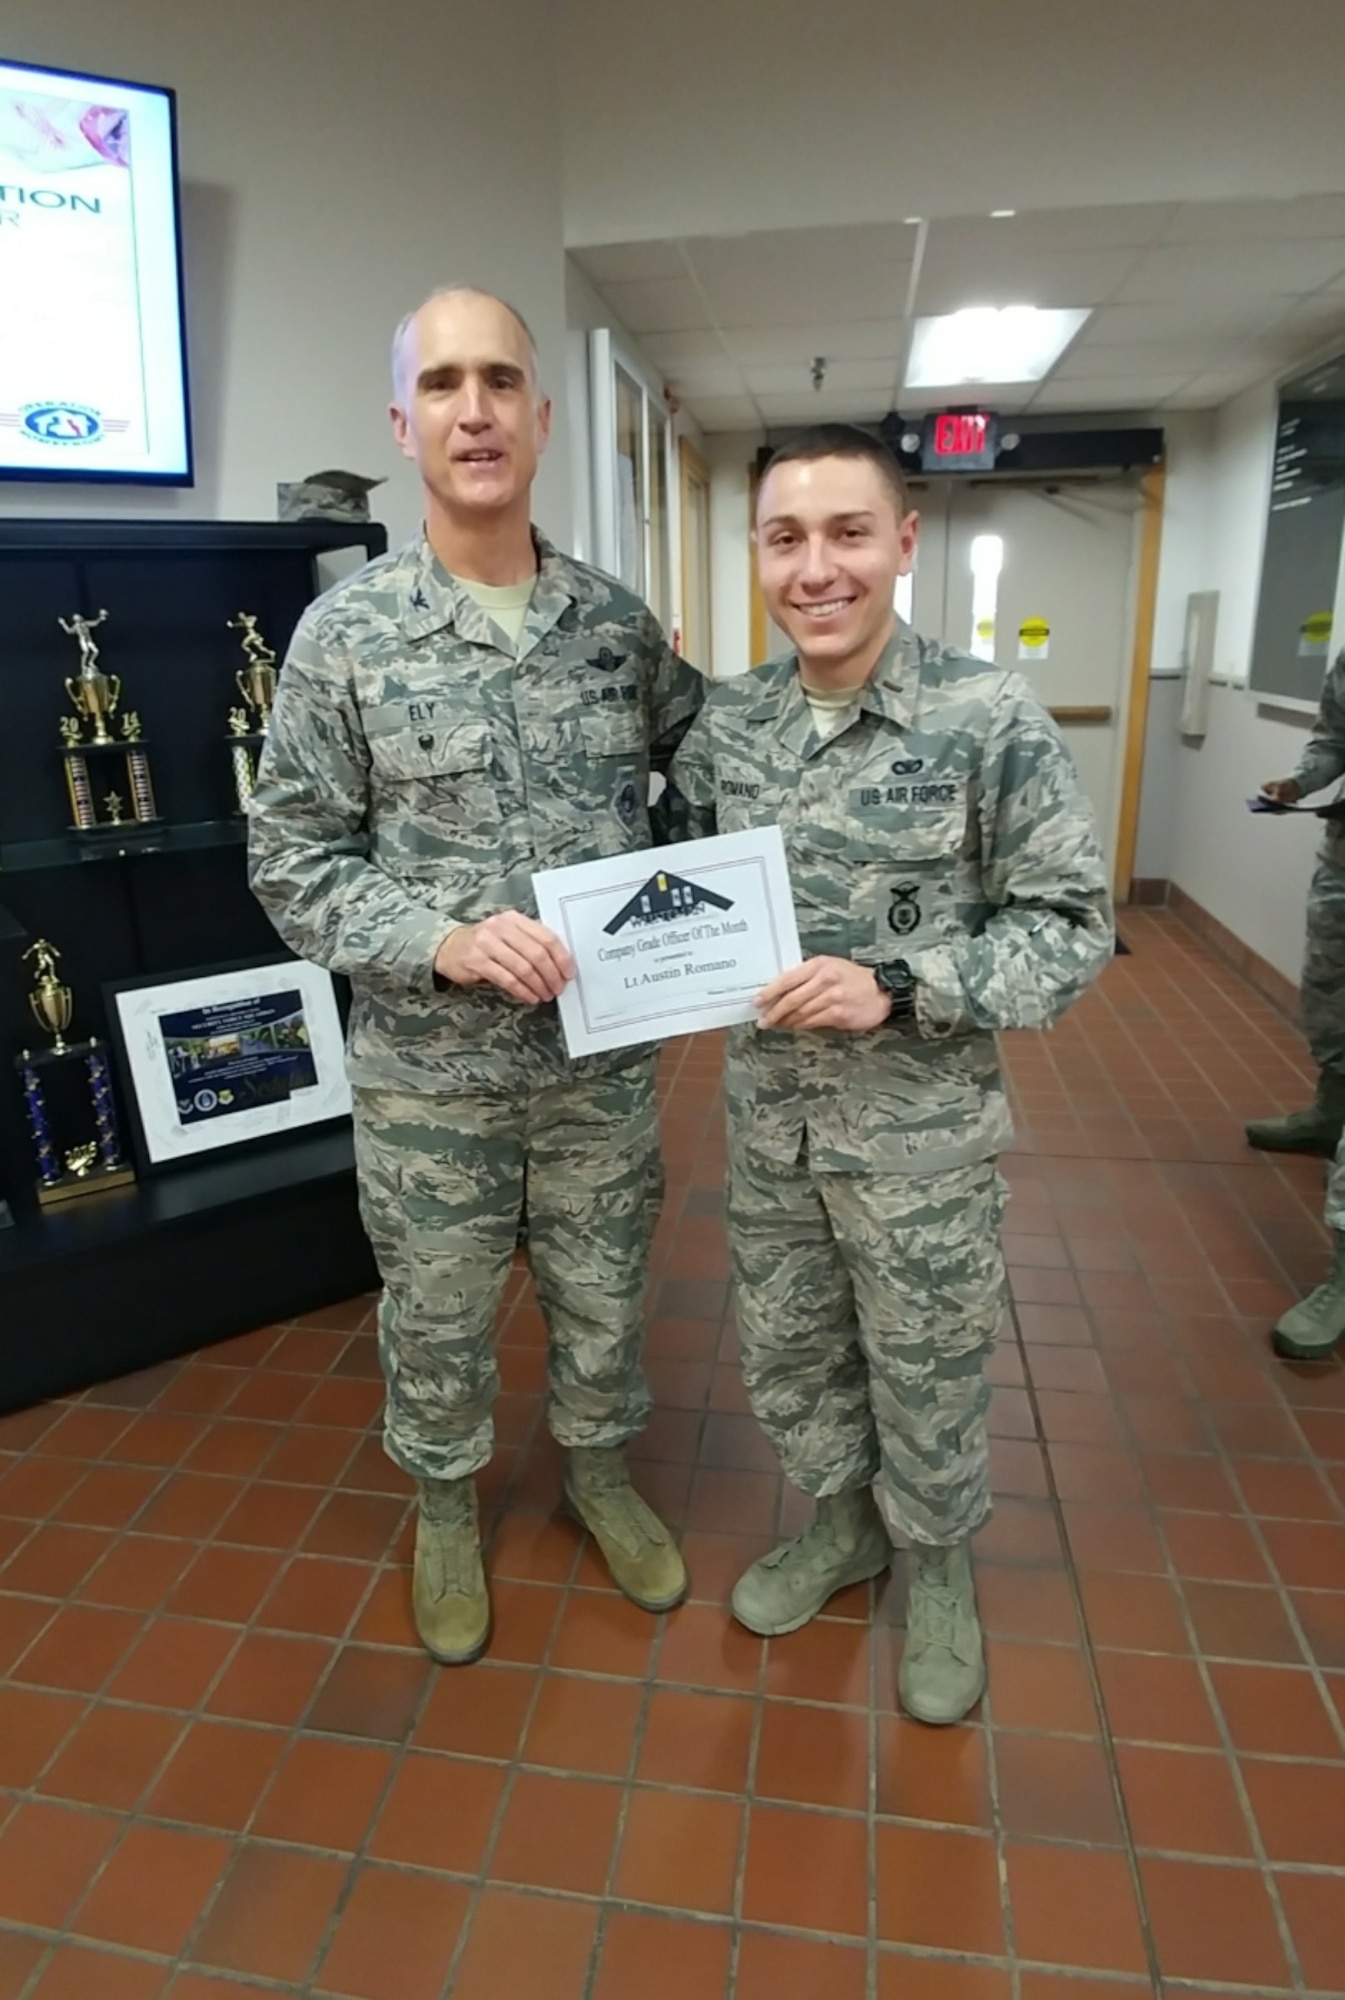 U.S. Air Force 2nd Lt. Austin Romano, the 509th Security Forces Sqaudron commander's support staff section officer in charge, right, receives a Whiteman Company Grade Officer Council (CGOC) Bars and Stars award for the month of September from Col. Mark Ely, the 509th Bomb Wing vice commander, at Whiteman Air Force Base, Mo., Dec. 13, 2017.